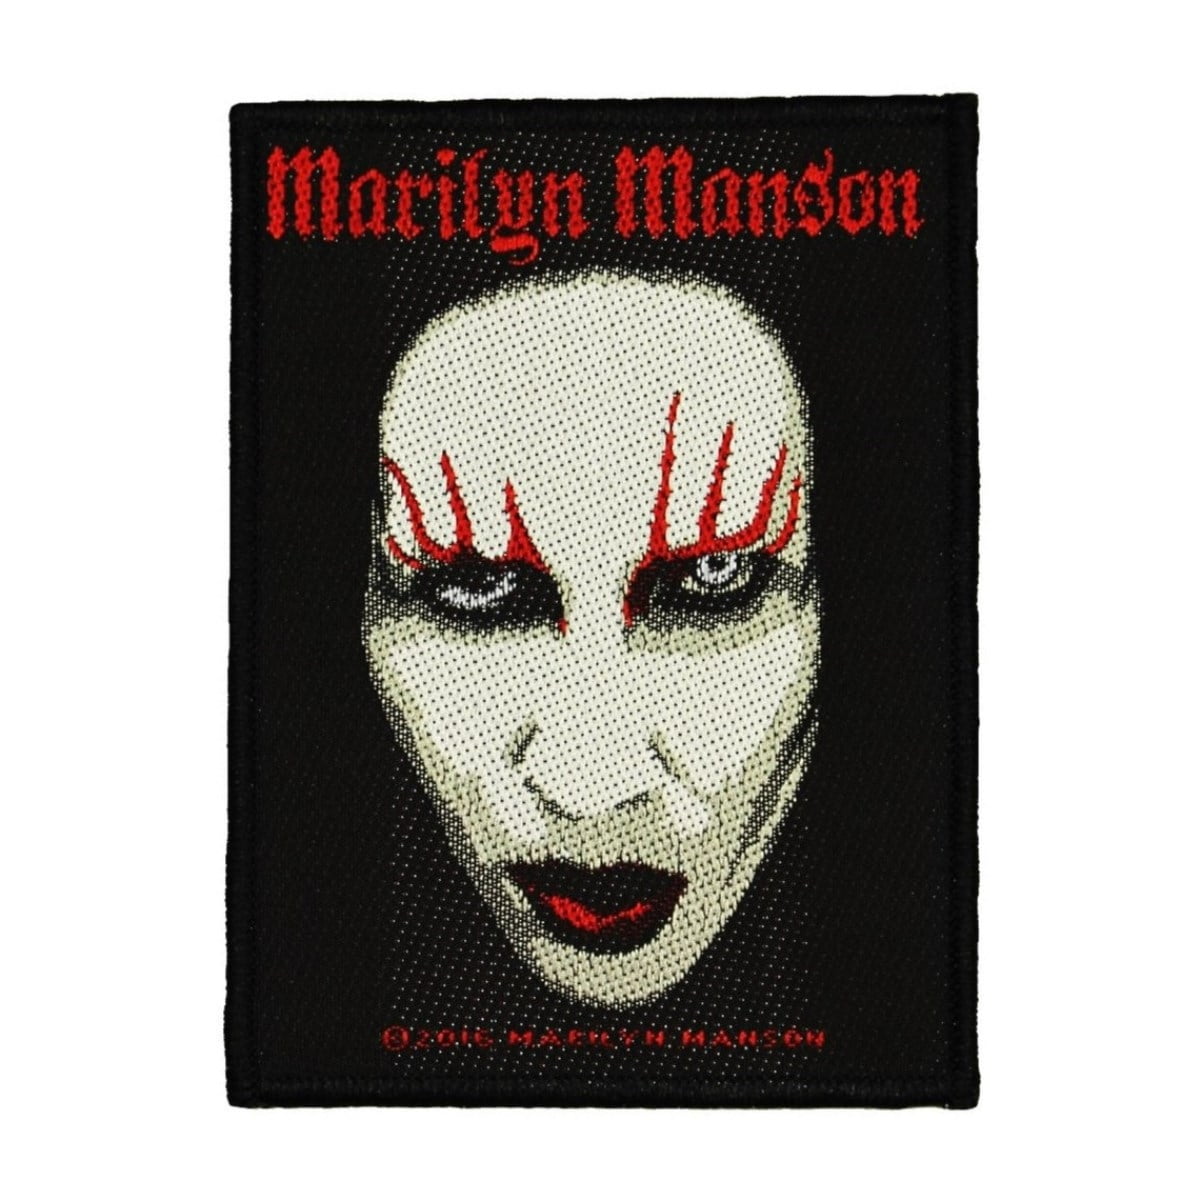 MARILYN MANSON printed patch FREE SHIPPING 